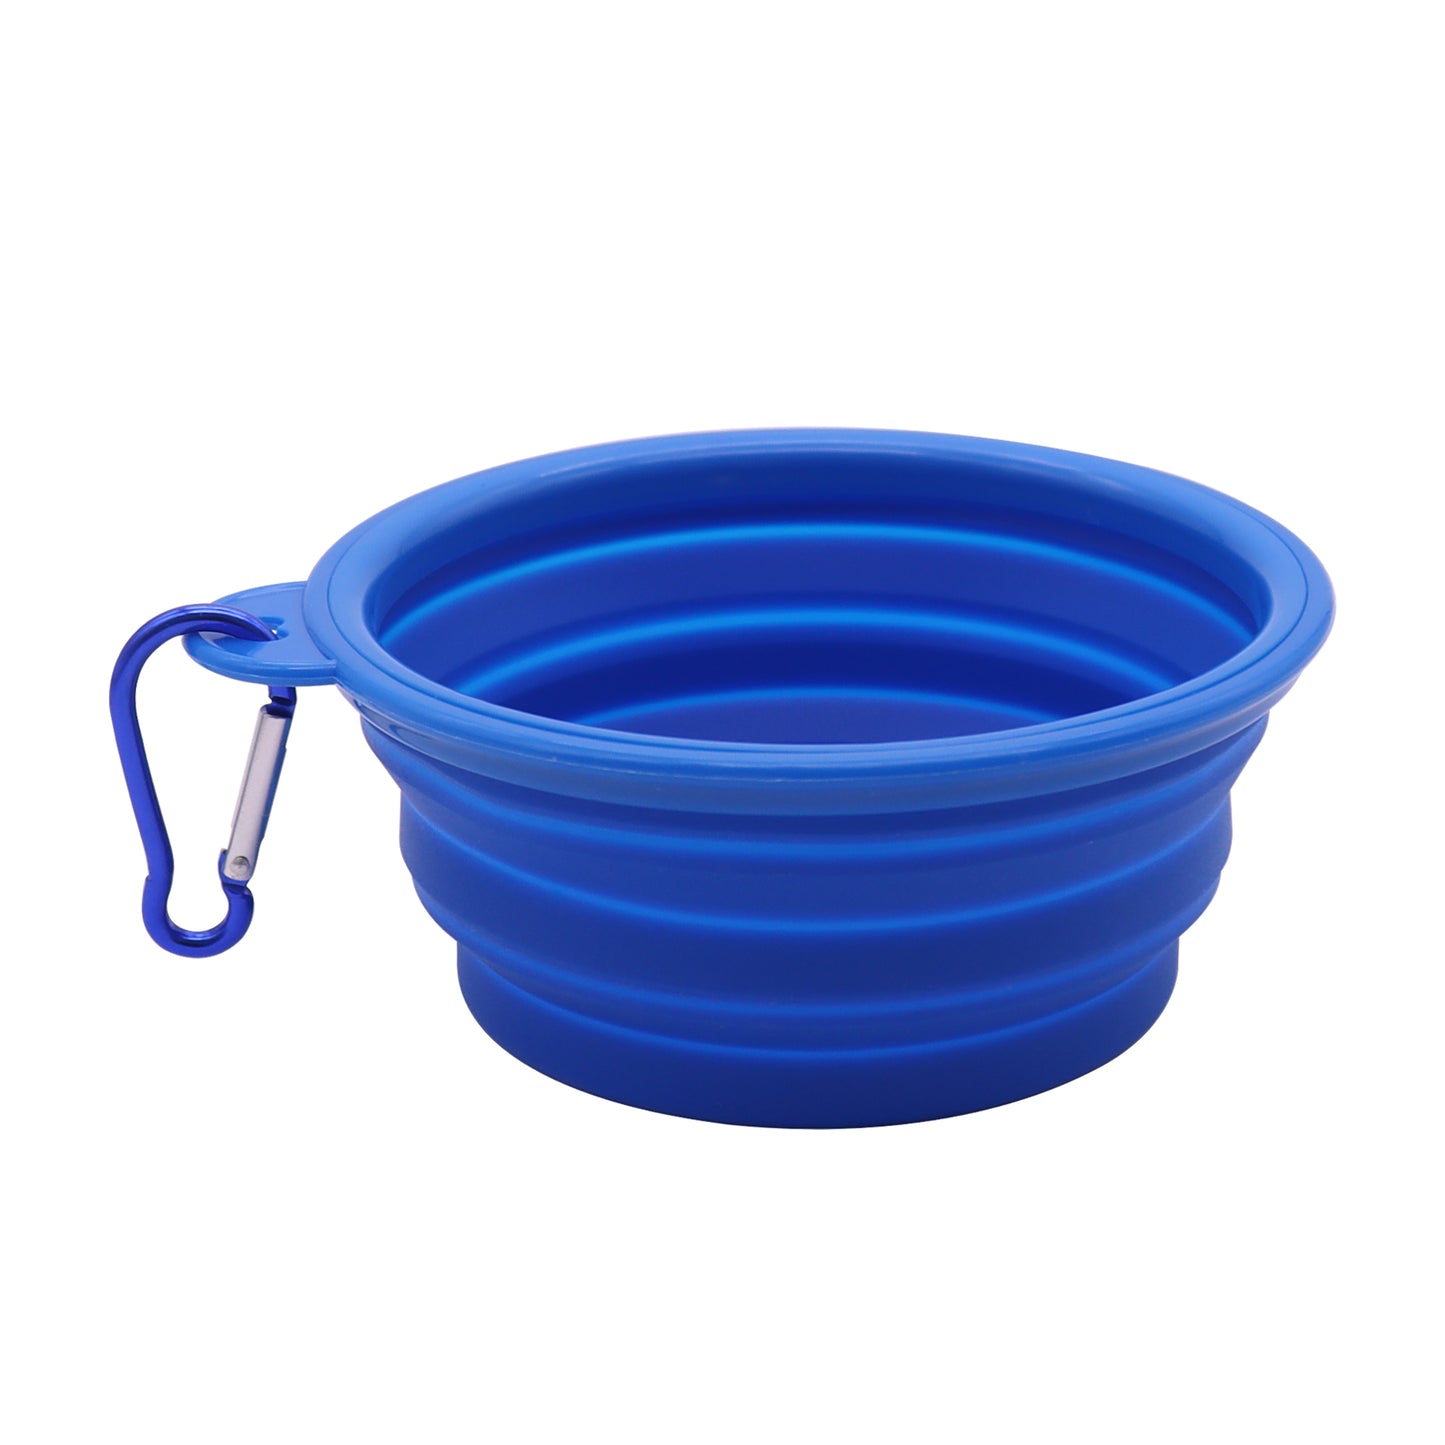 Royal Pets USA Collapsible Dog Travel Bowls, Portable Water Bowl for Dogs or Cats Pet Foldable Feeding Water or Treat for Traveling, Walking & Camping with Carabiner, BPA Free  650ml